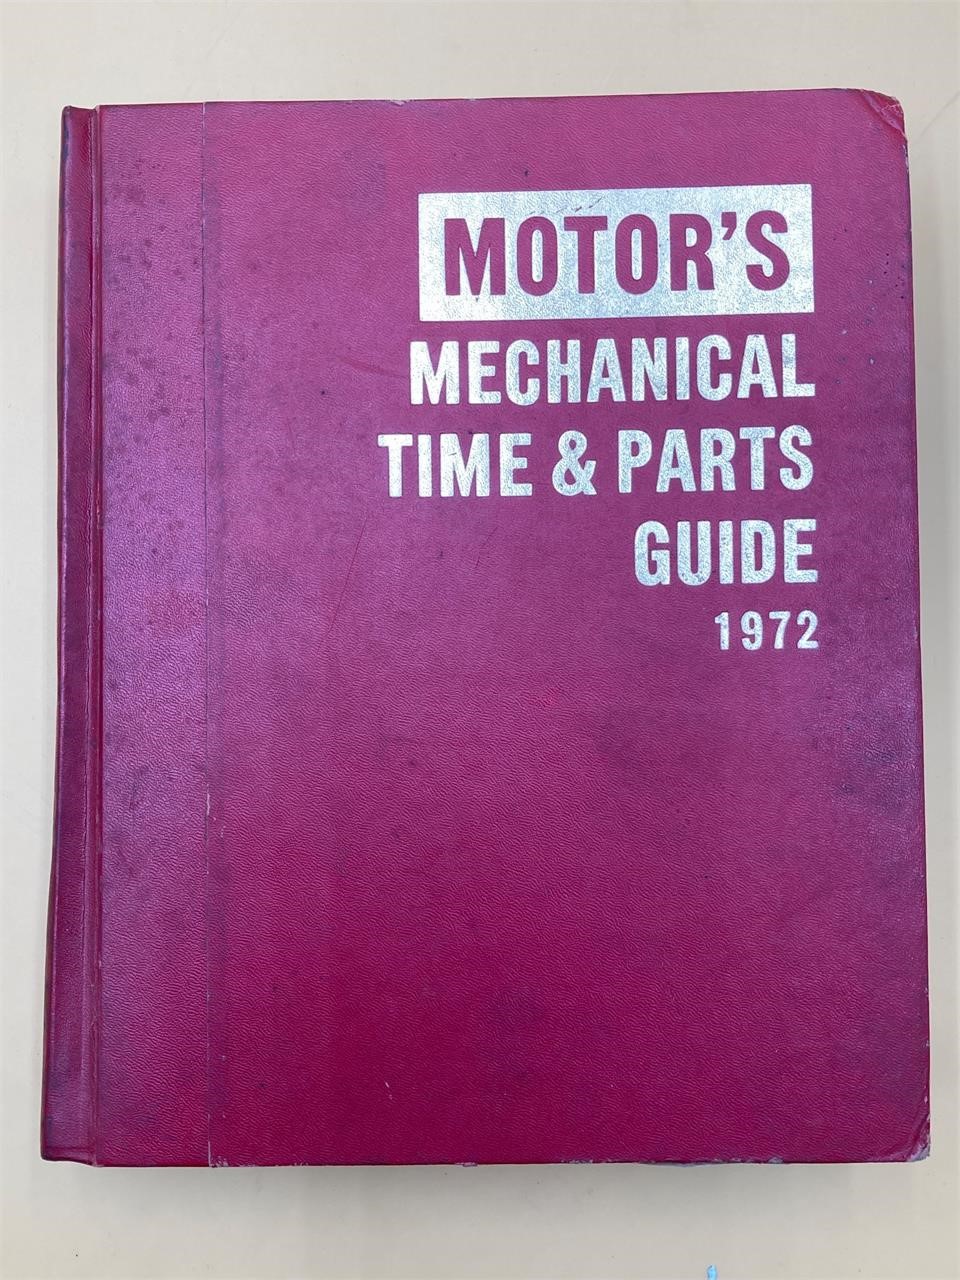 1972 Motor’s Time & Parts Guide Book